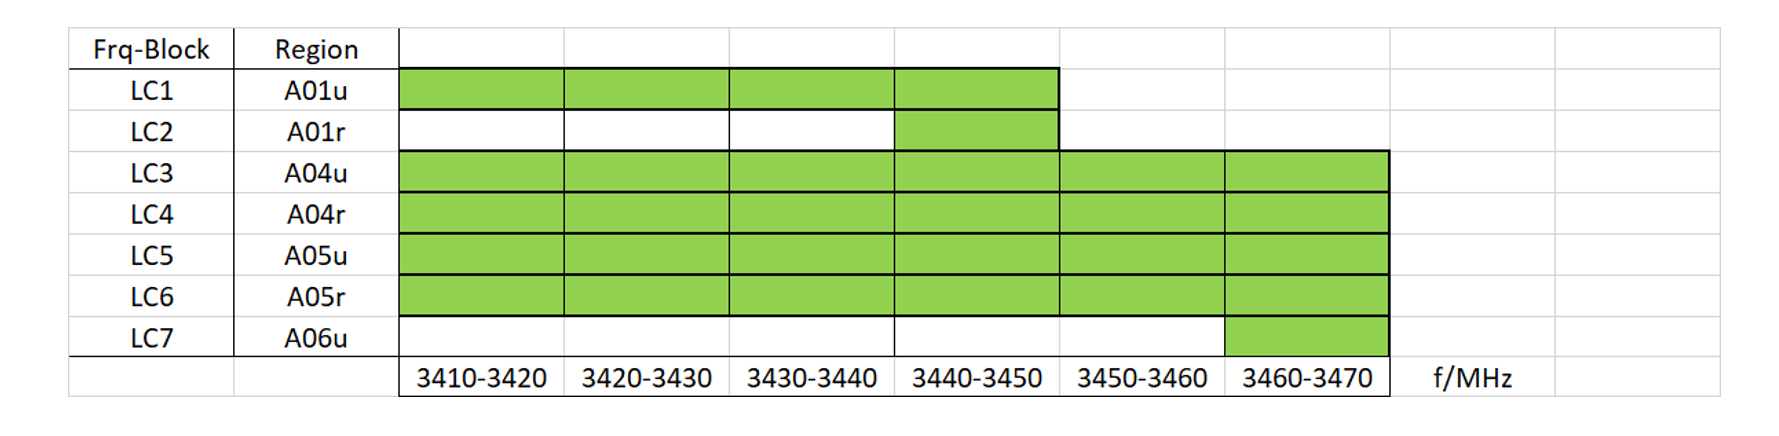 Frequency blocks 3600 MHz